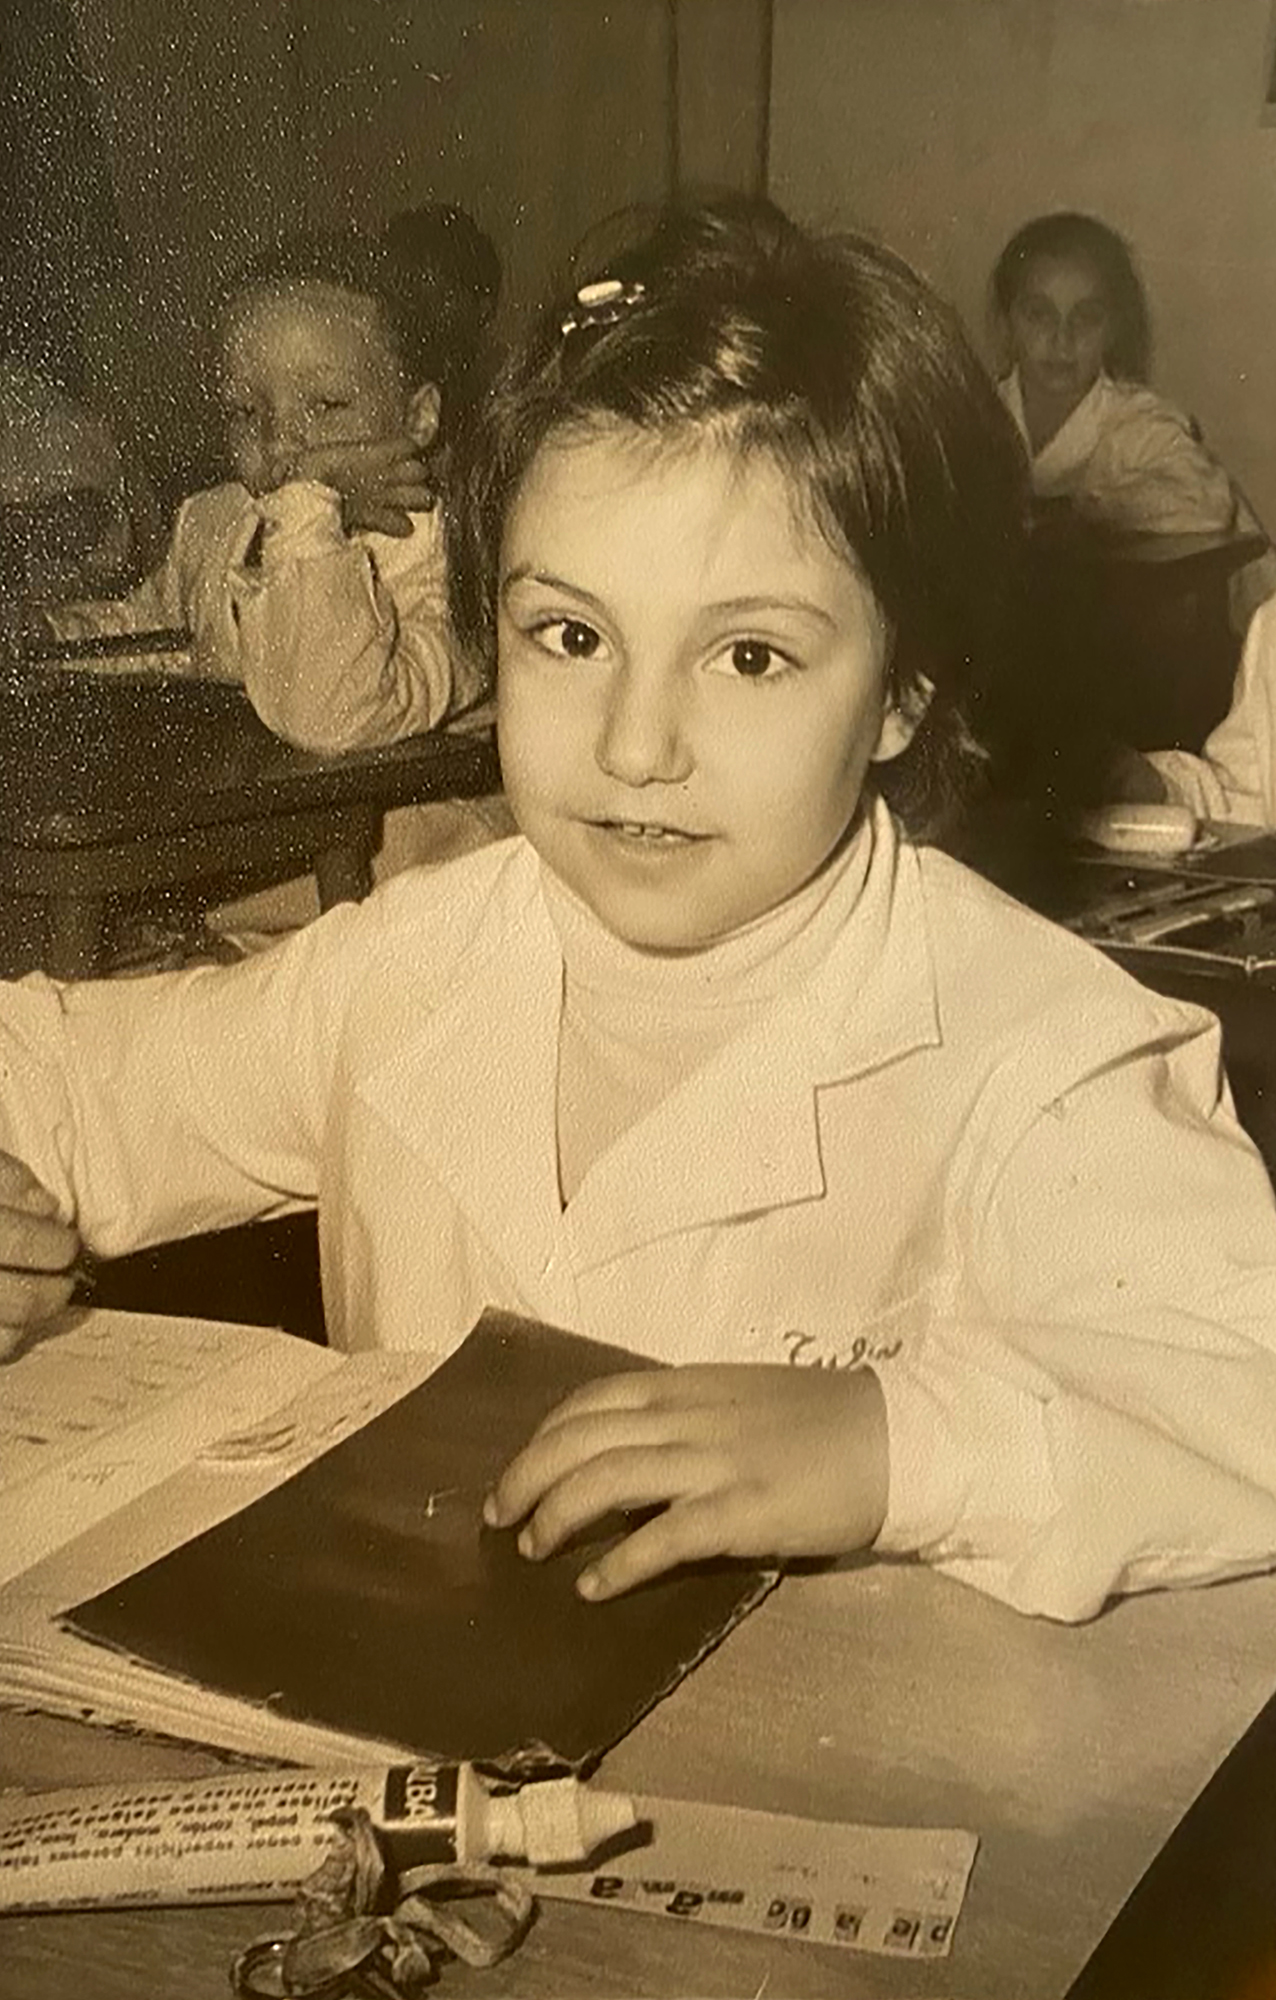 tulia falleti as a young student